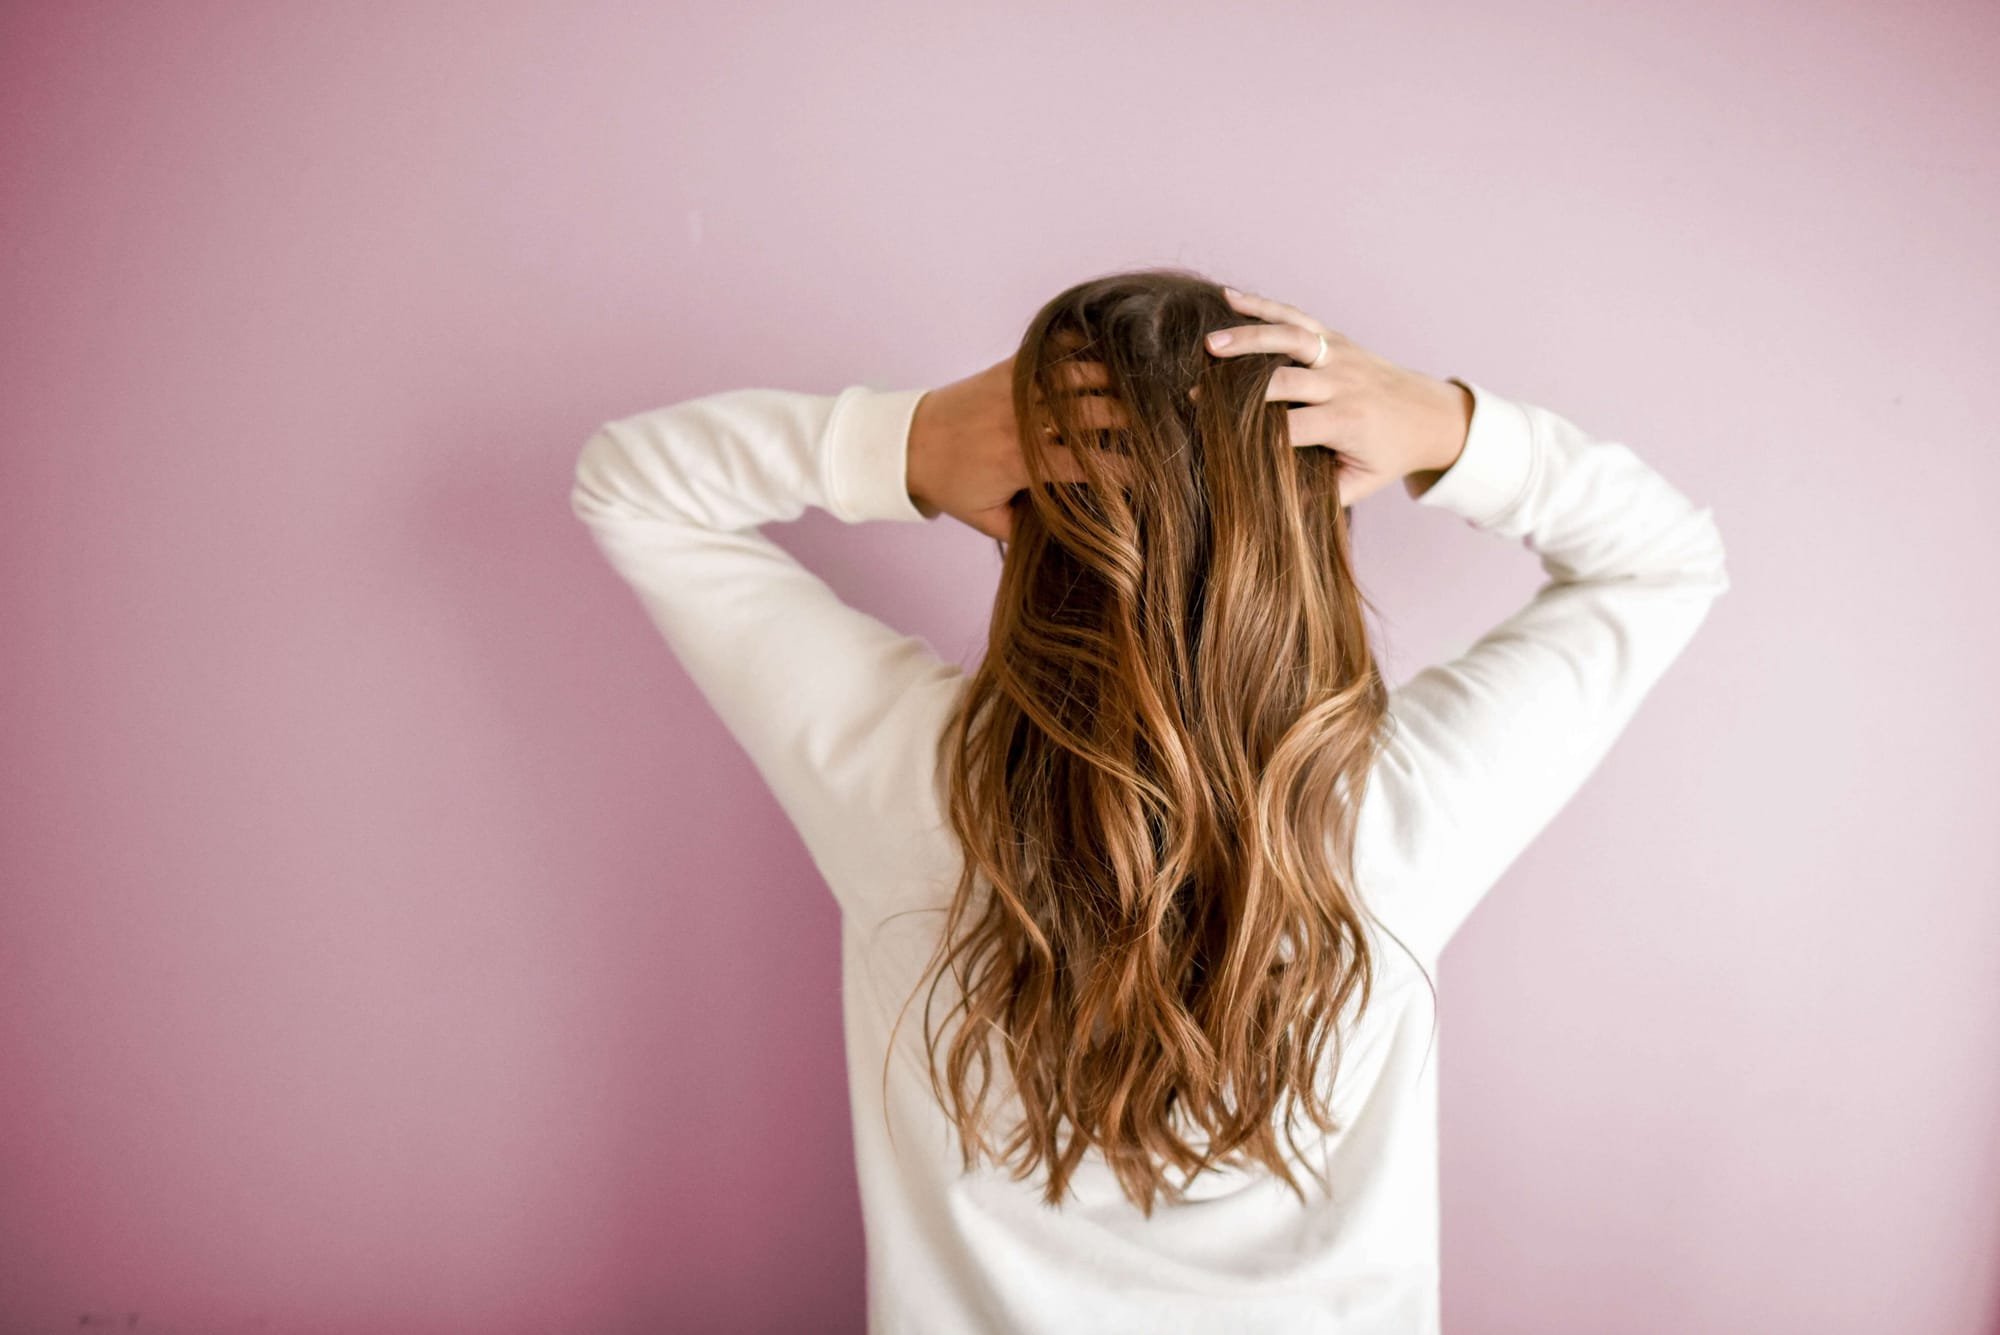 Waxing: Does it Stops Your Hair Growth?